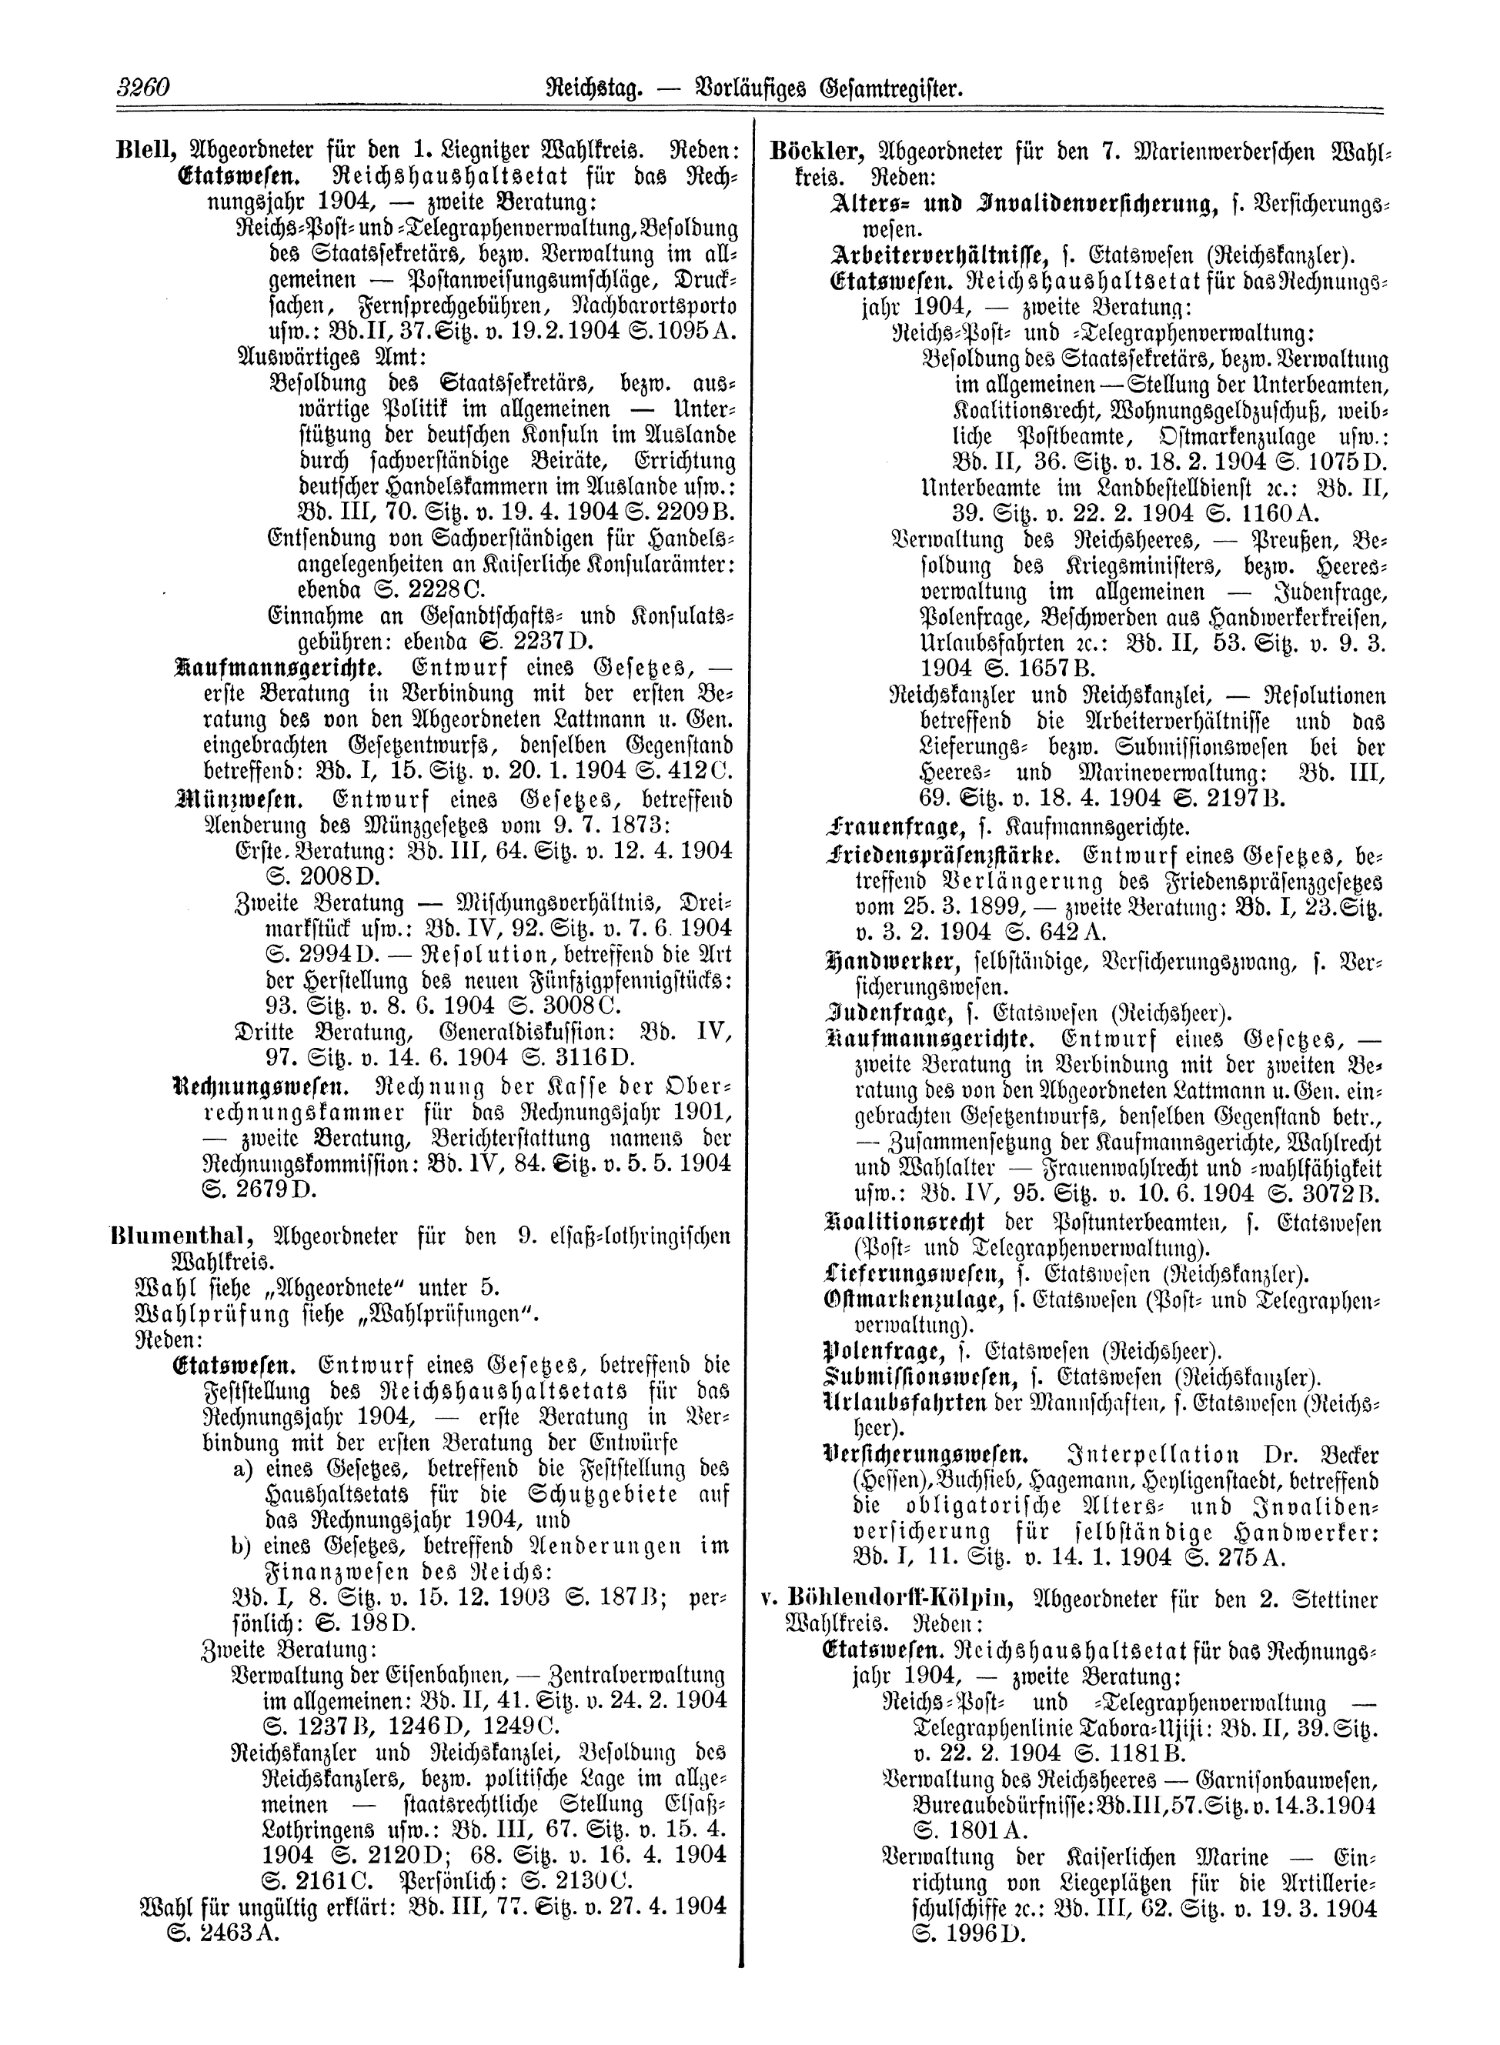 Scan of page 3260